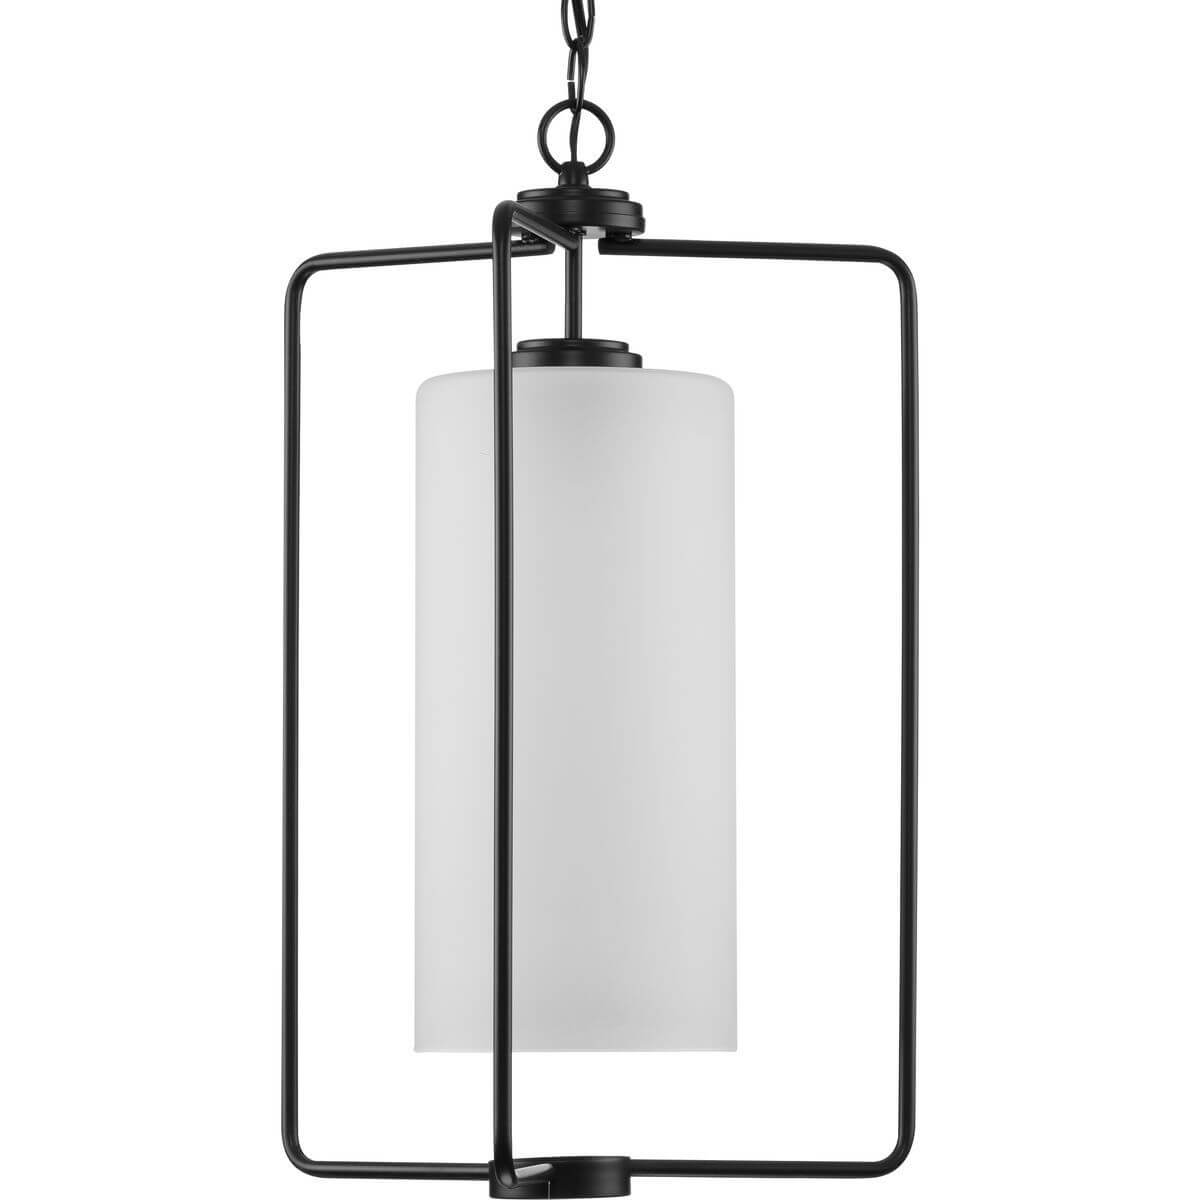 Progress Lighting Merry 1 Light 15 inch Foyer Pendant in Matte Black with Etched Glass P500333-031